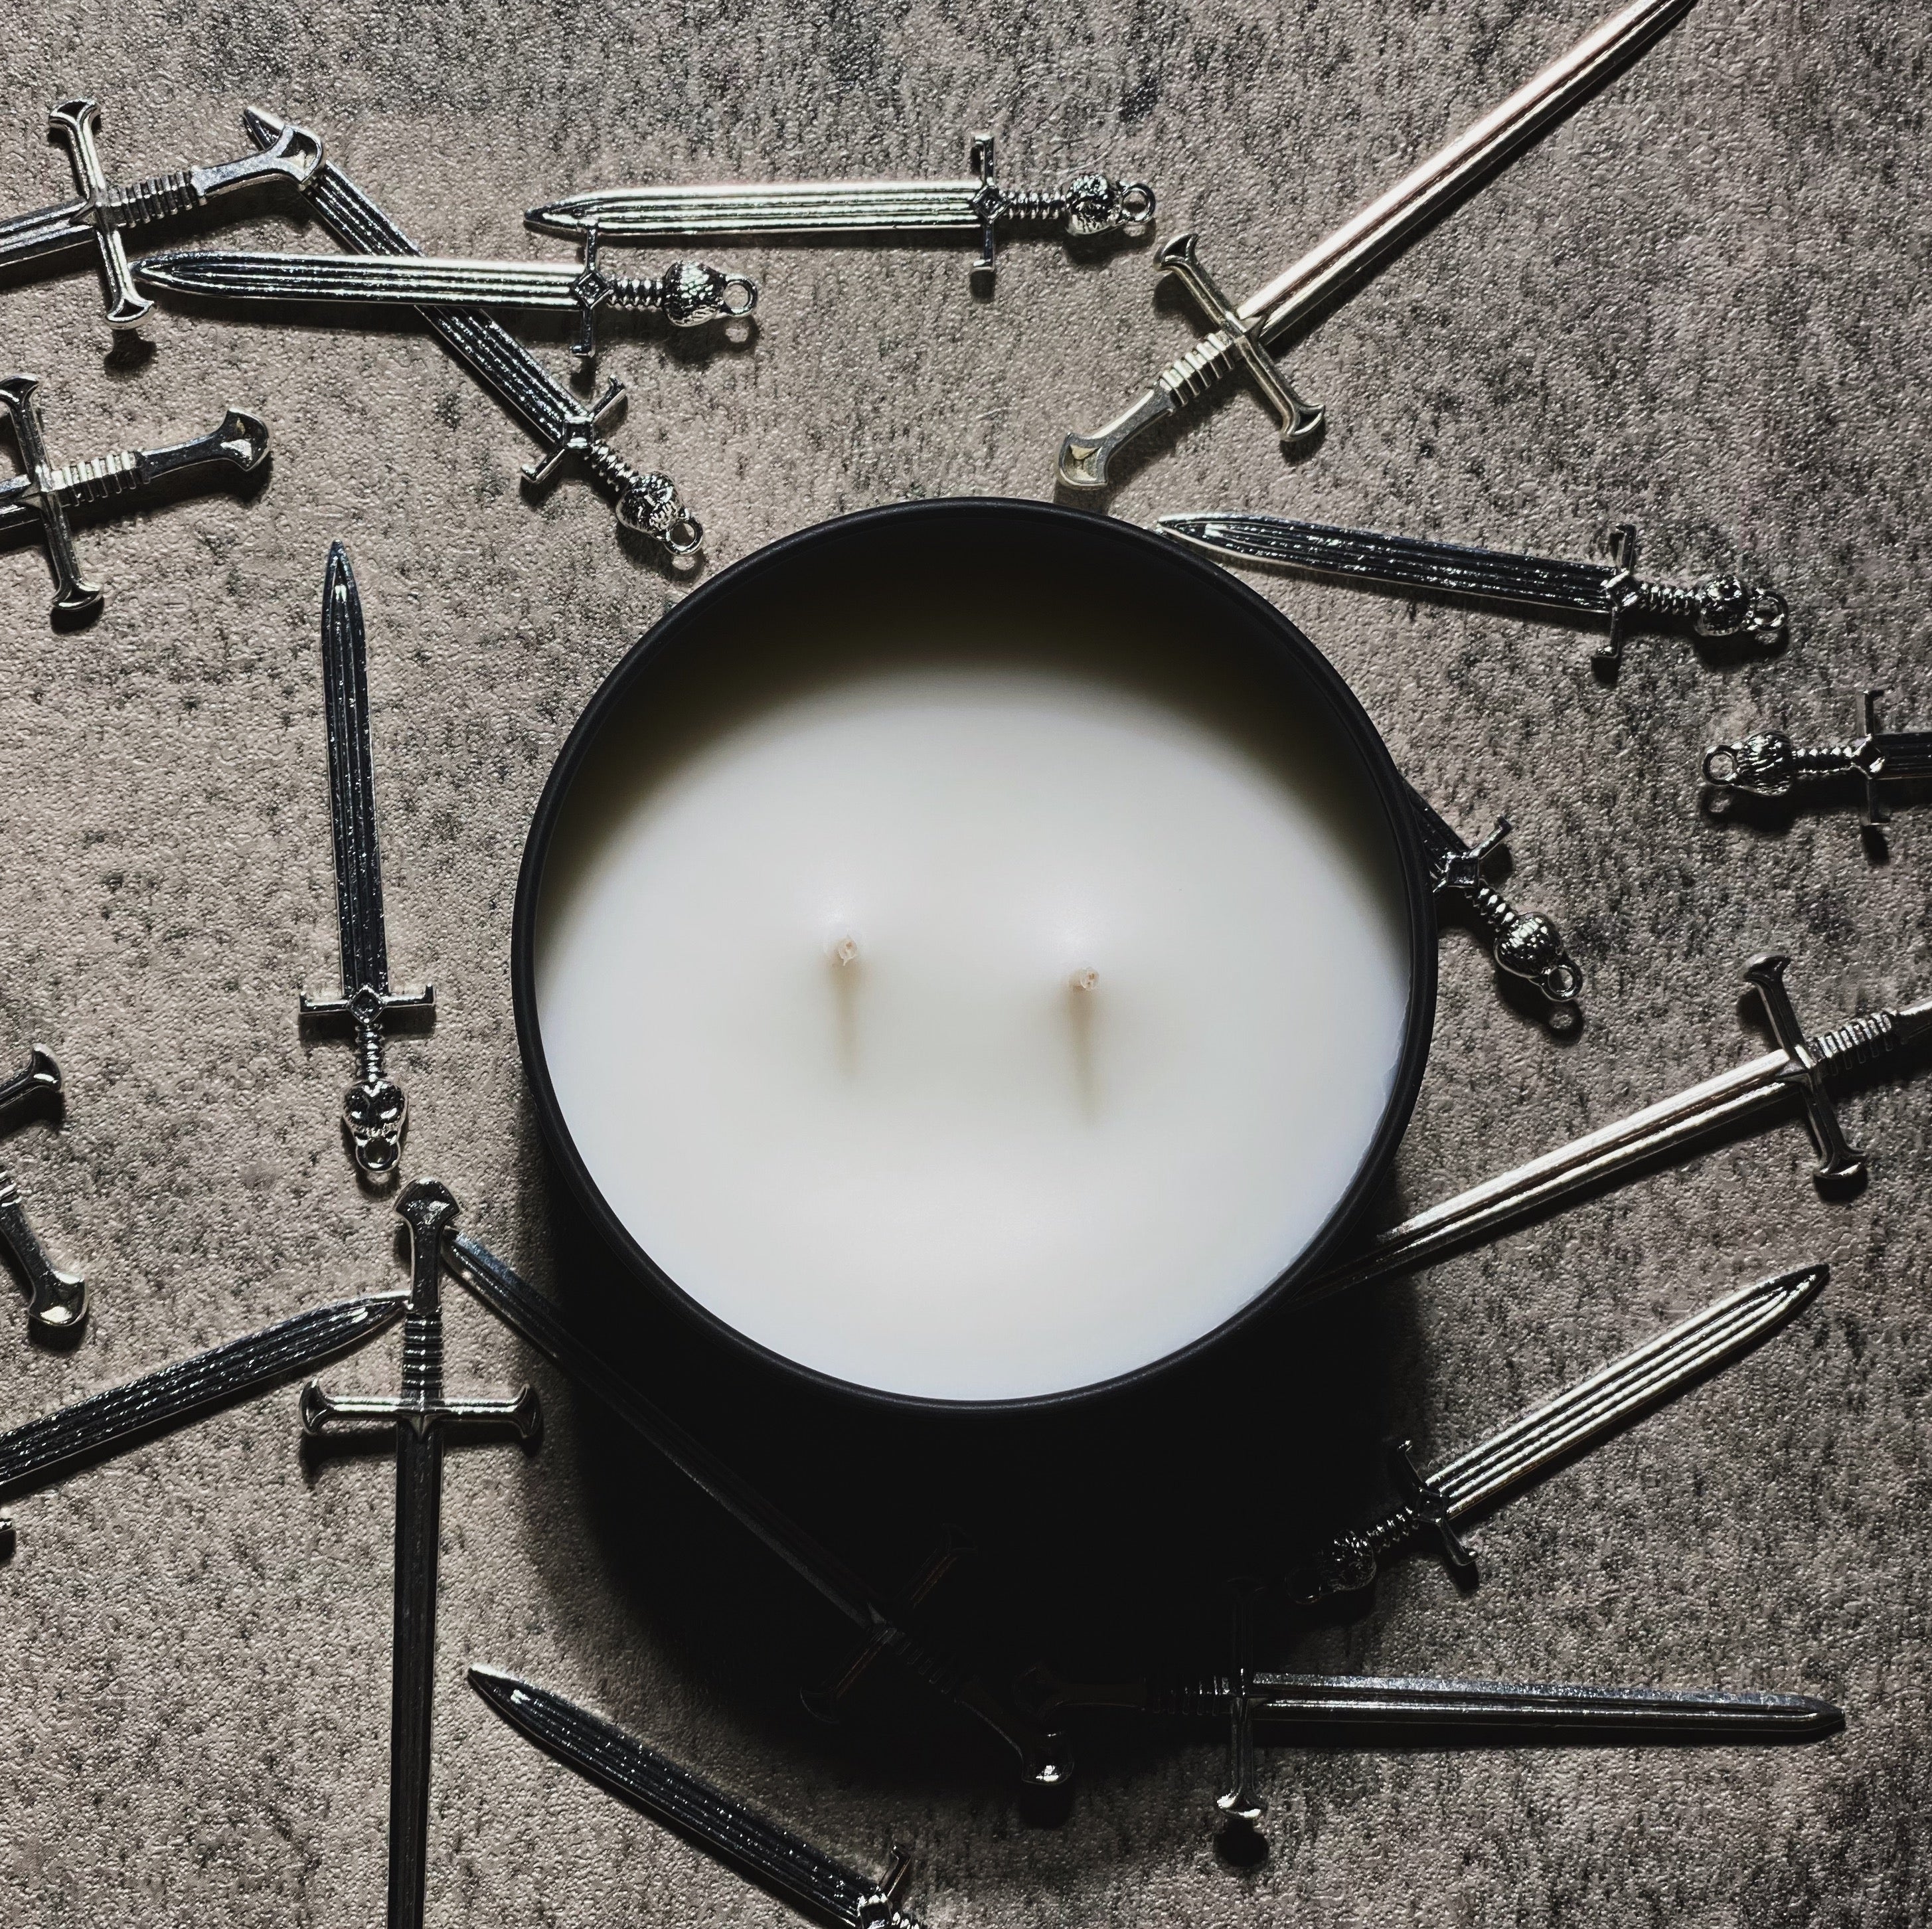 The White Wolf Candle | Onyx Tin